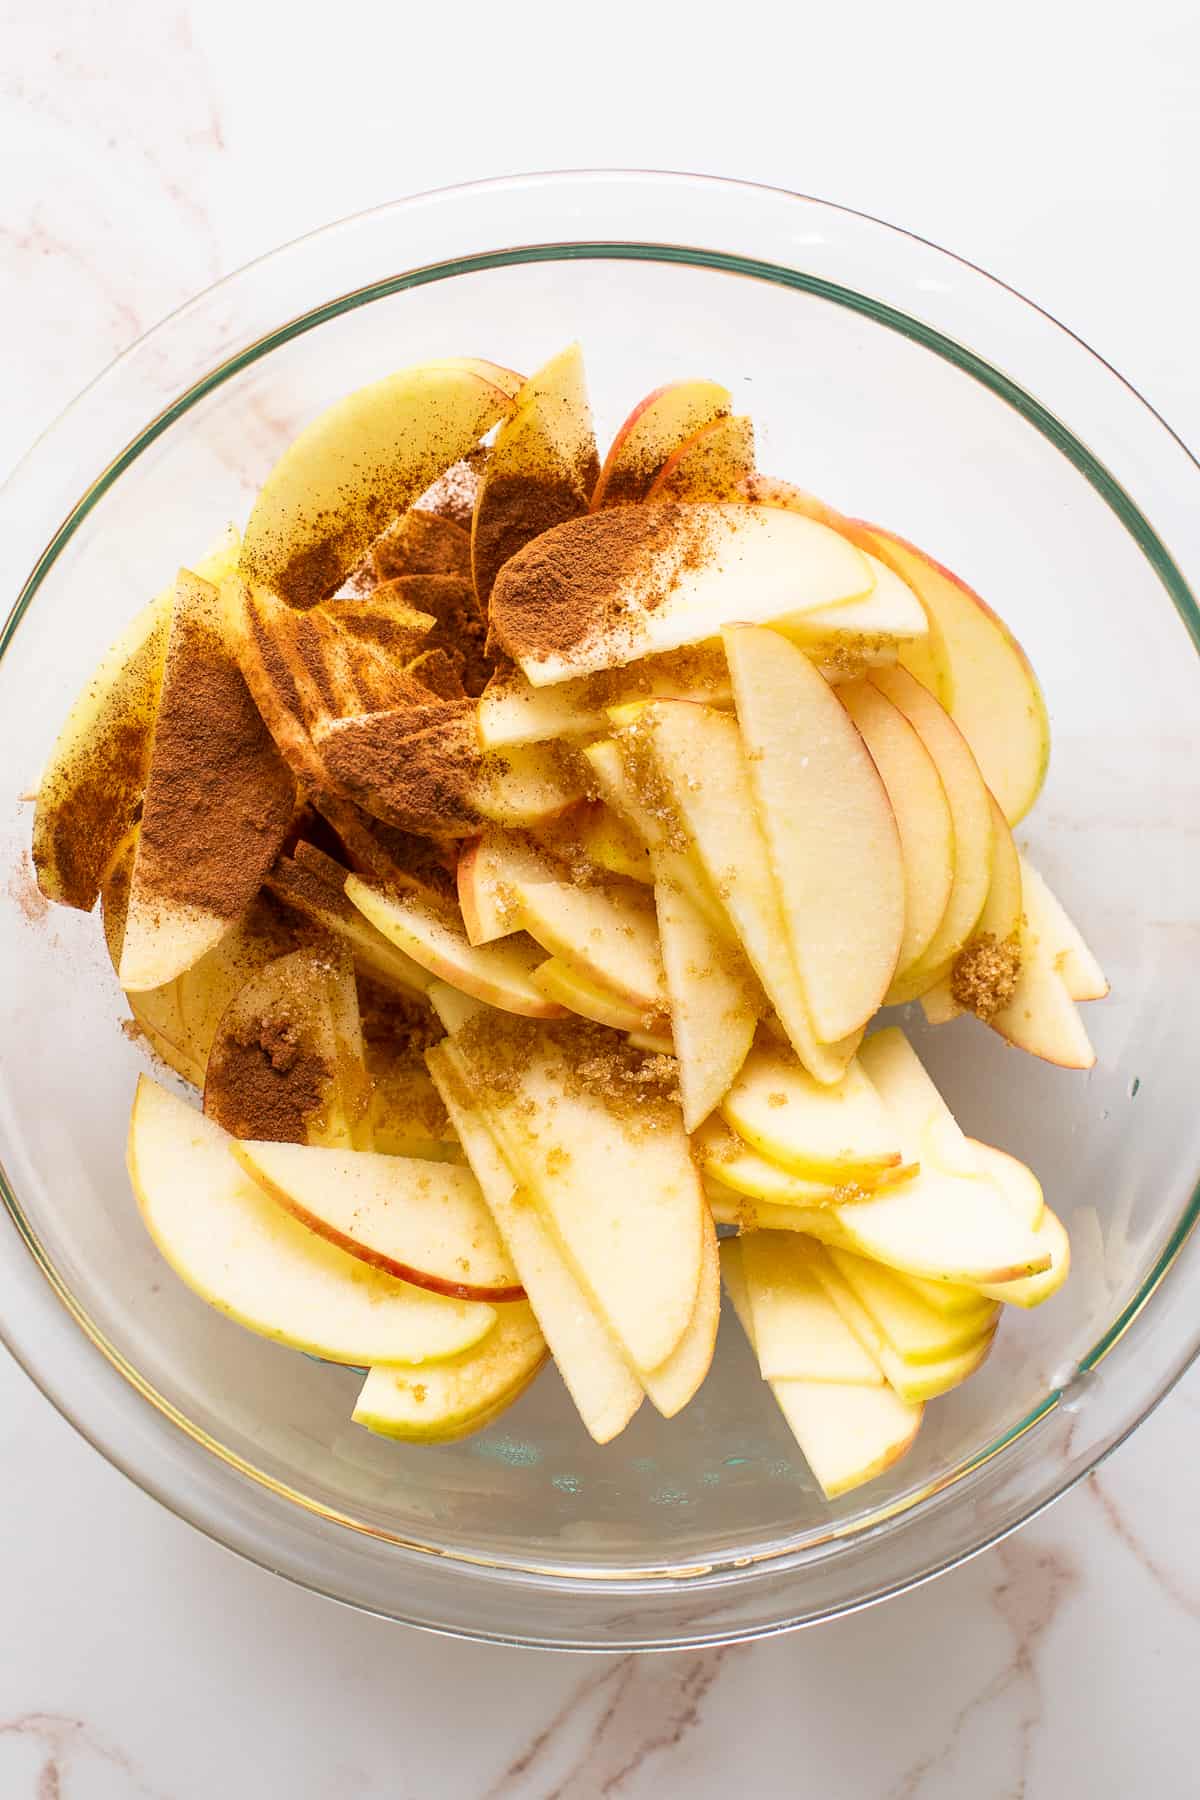 bowl of sliced apples with cinnamon on top.